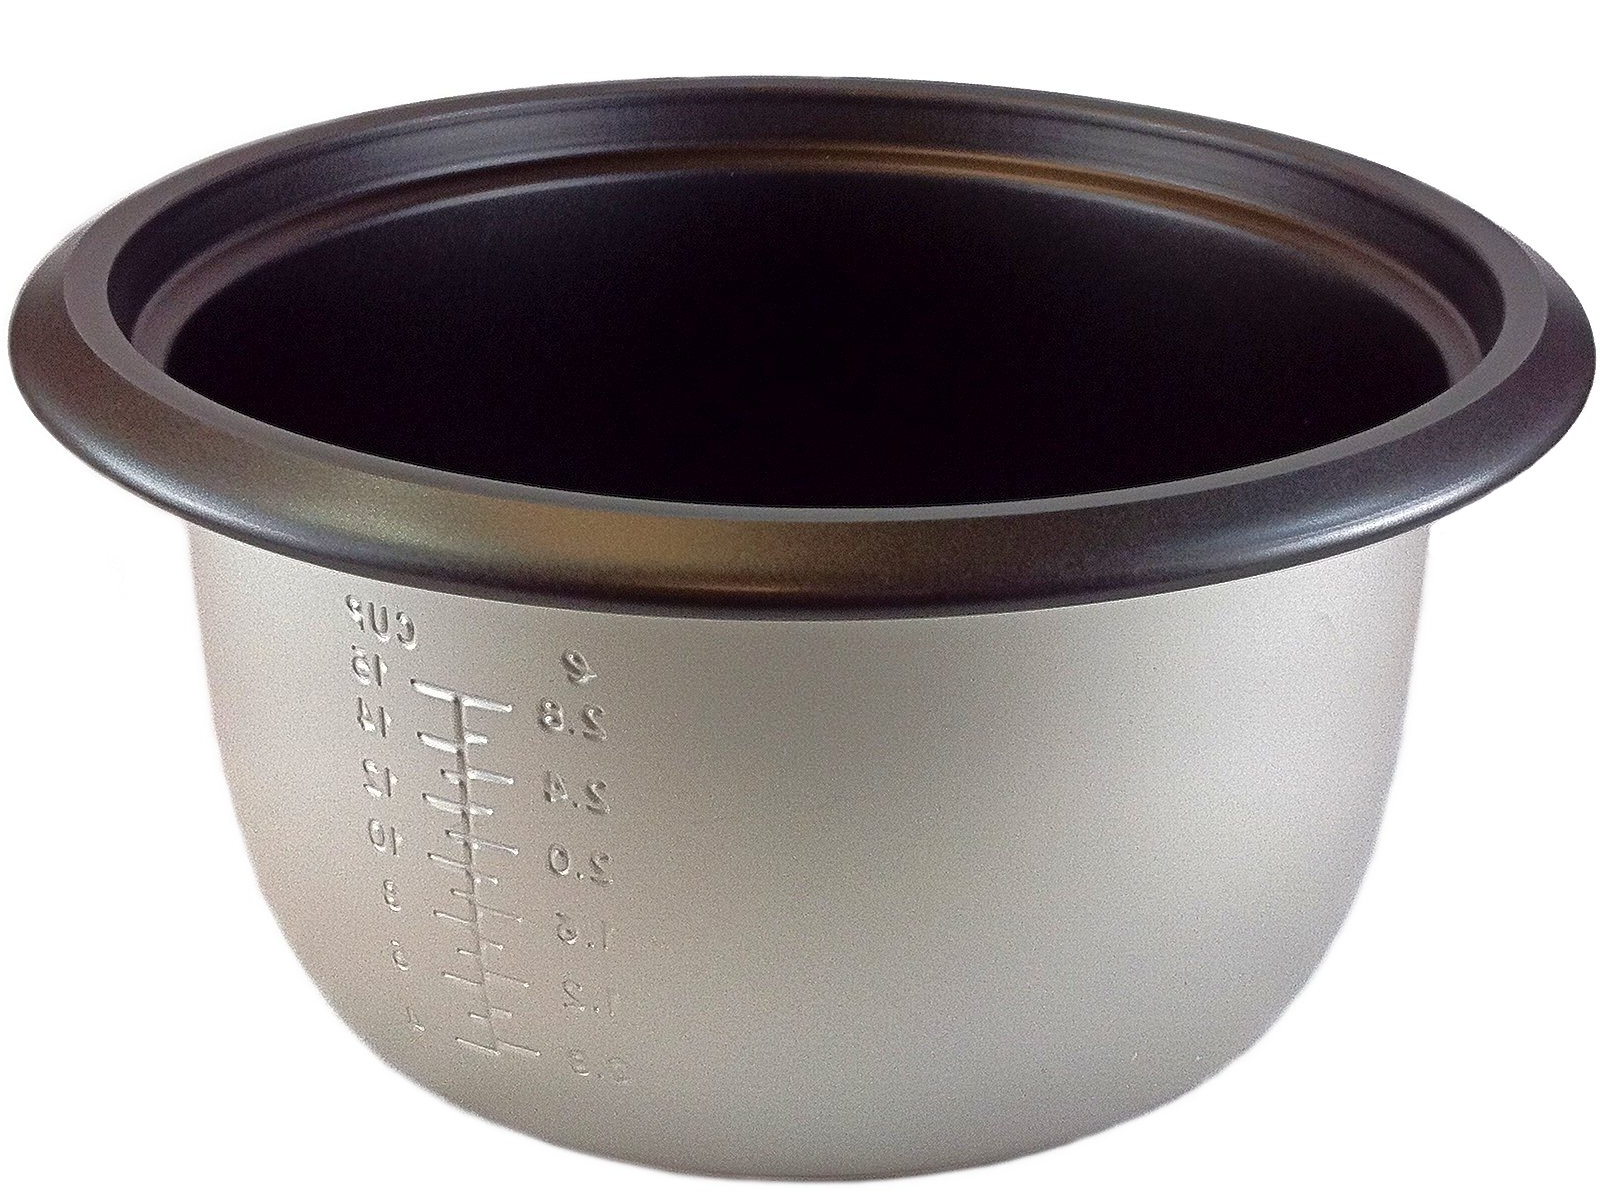 Get parts for Cooking Pot, 30 Cup